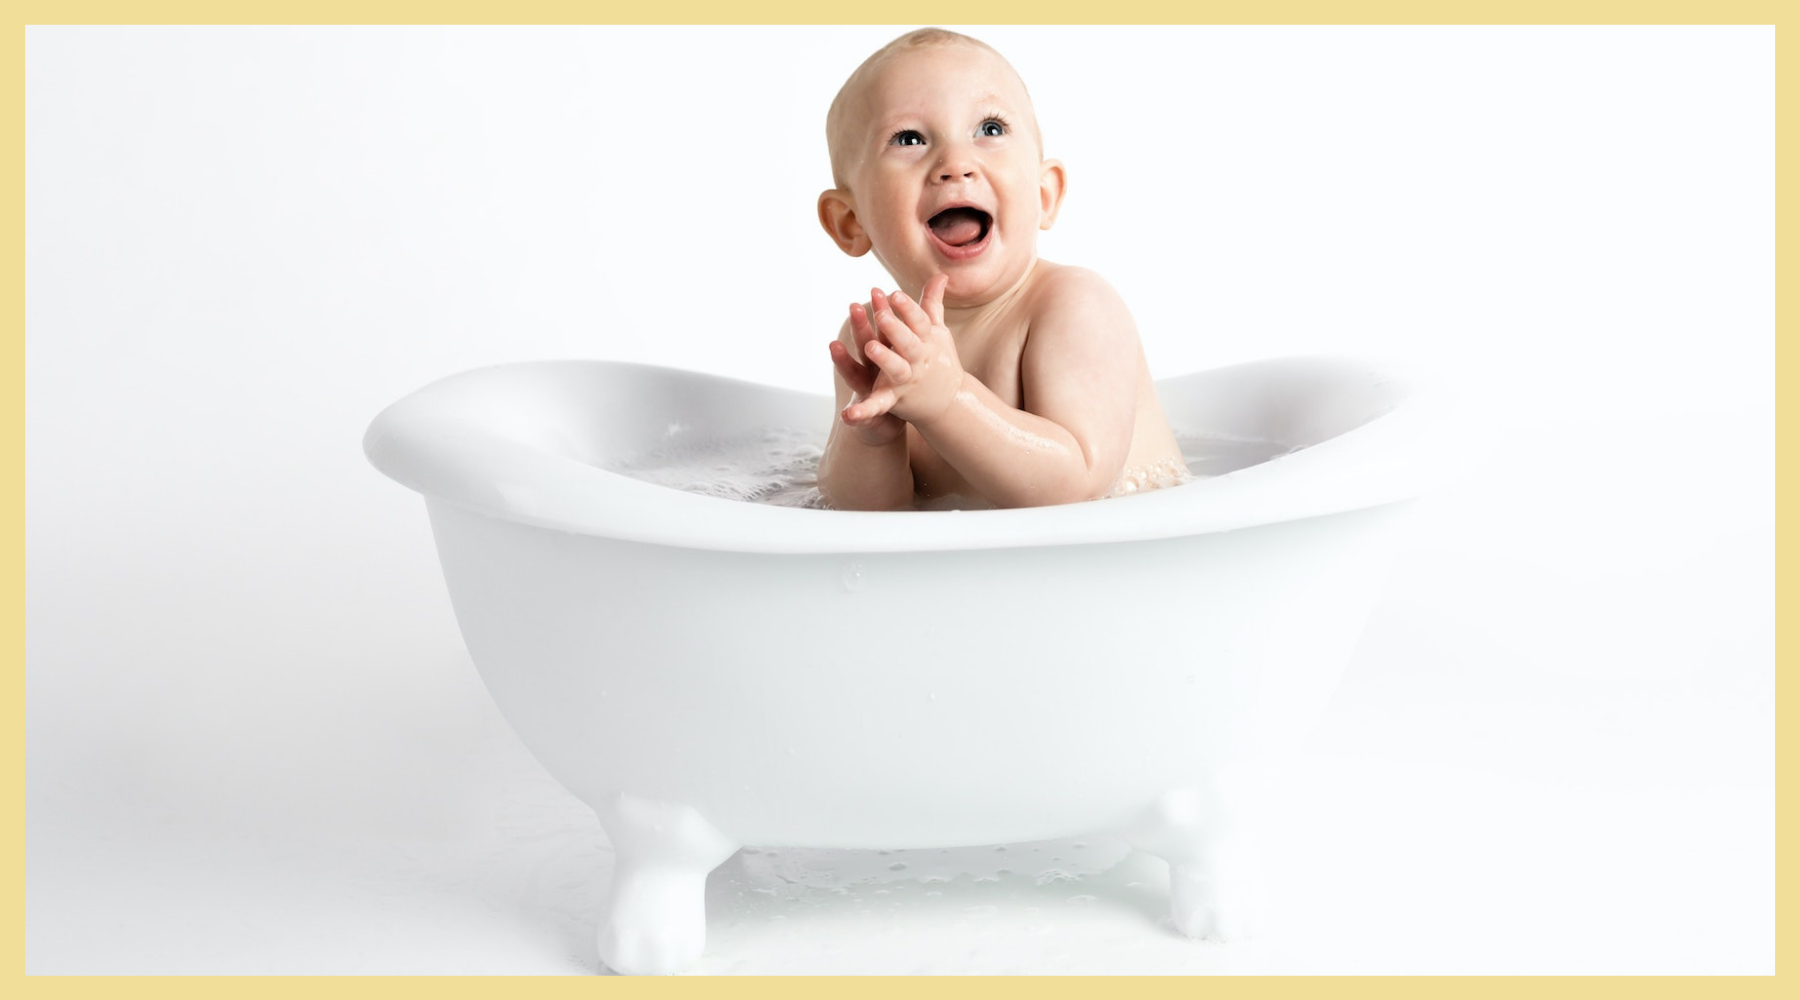 how often should you bath your baby, toddler or young child